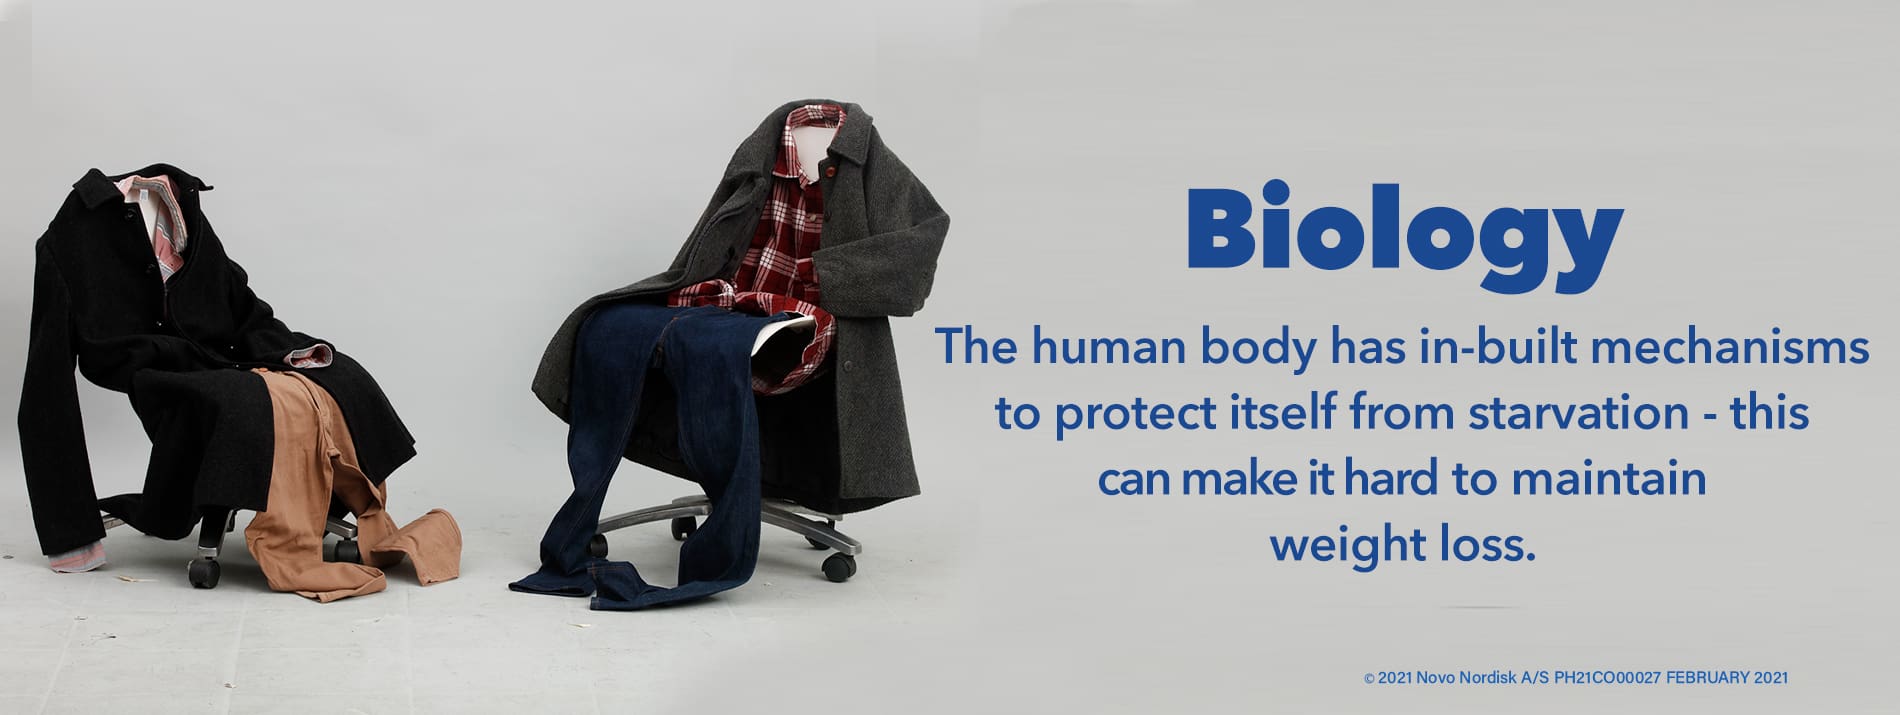 Biology - the human body has in-built mechanisms to protect itself from starvation - this can make it hard to maintain weight loss.